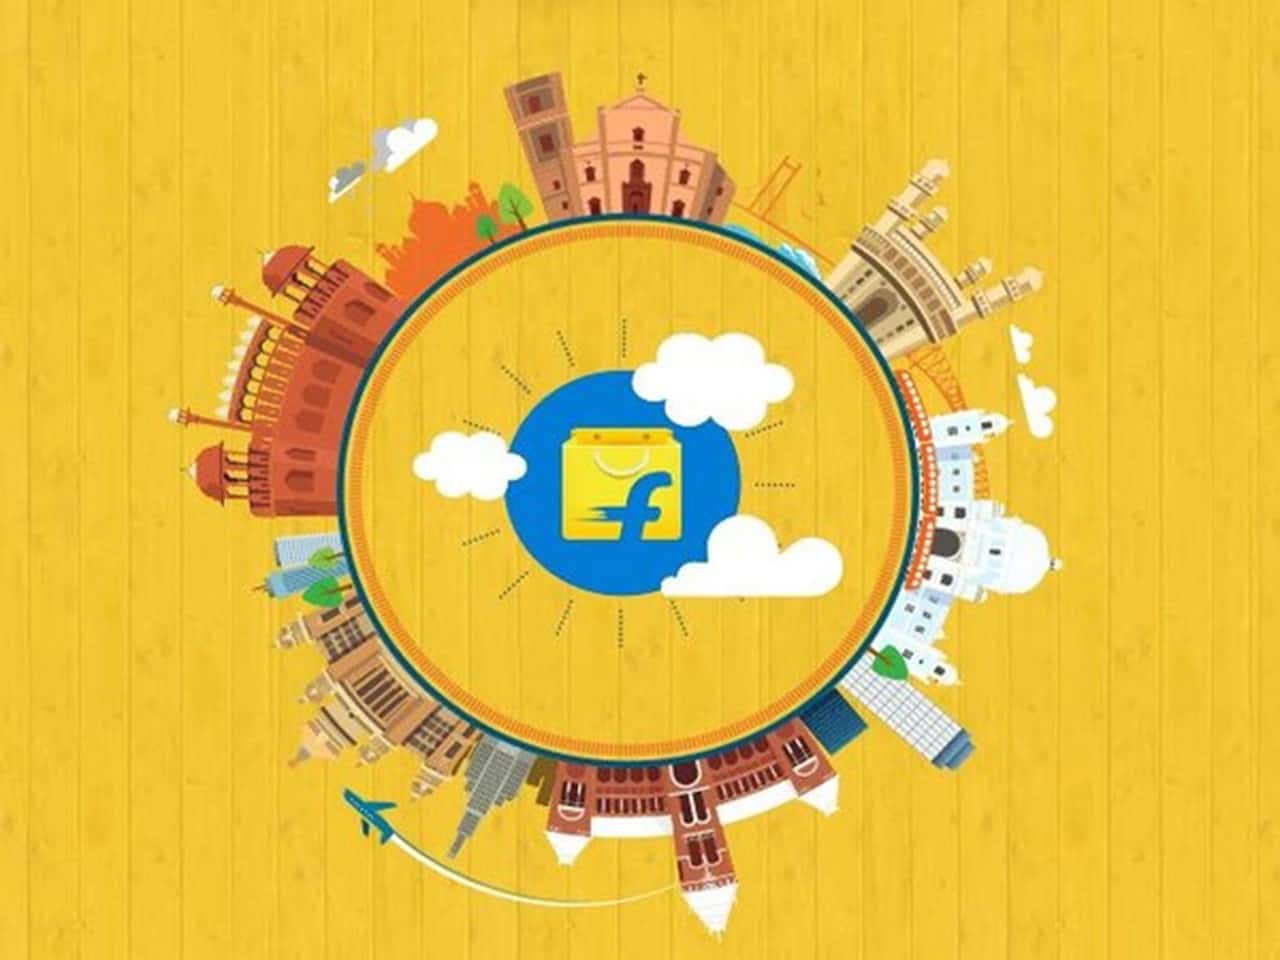 Flipkart partners with NULM to empower artisans and self-help groups